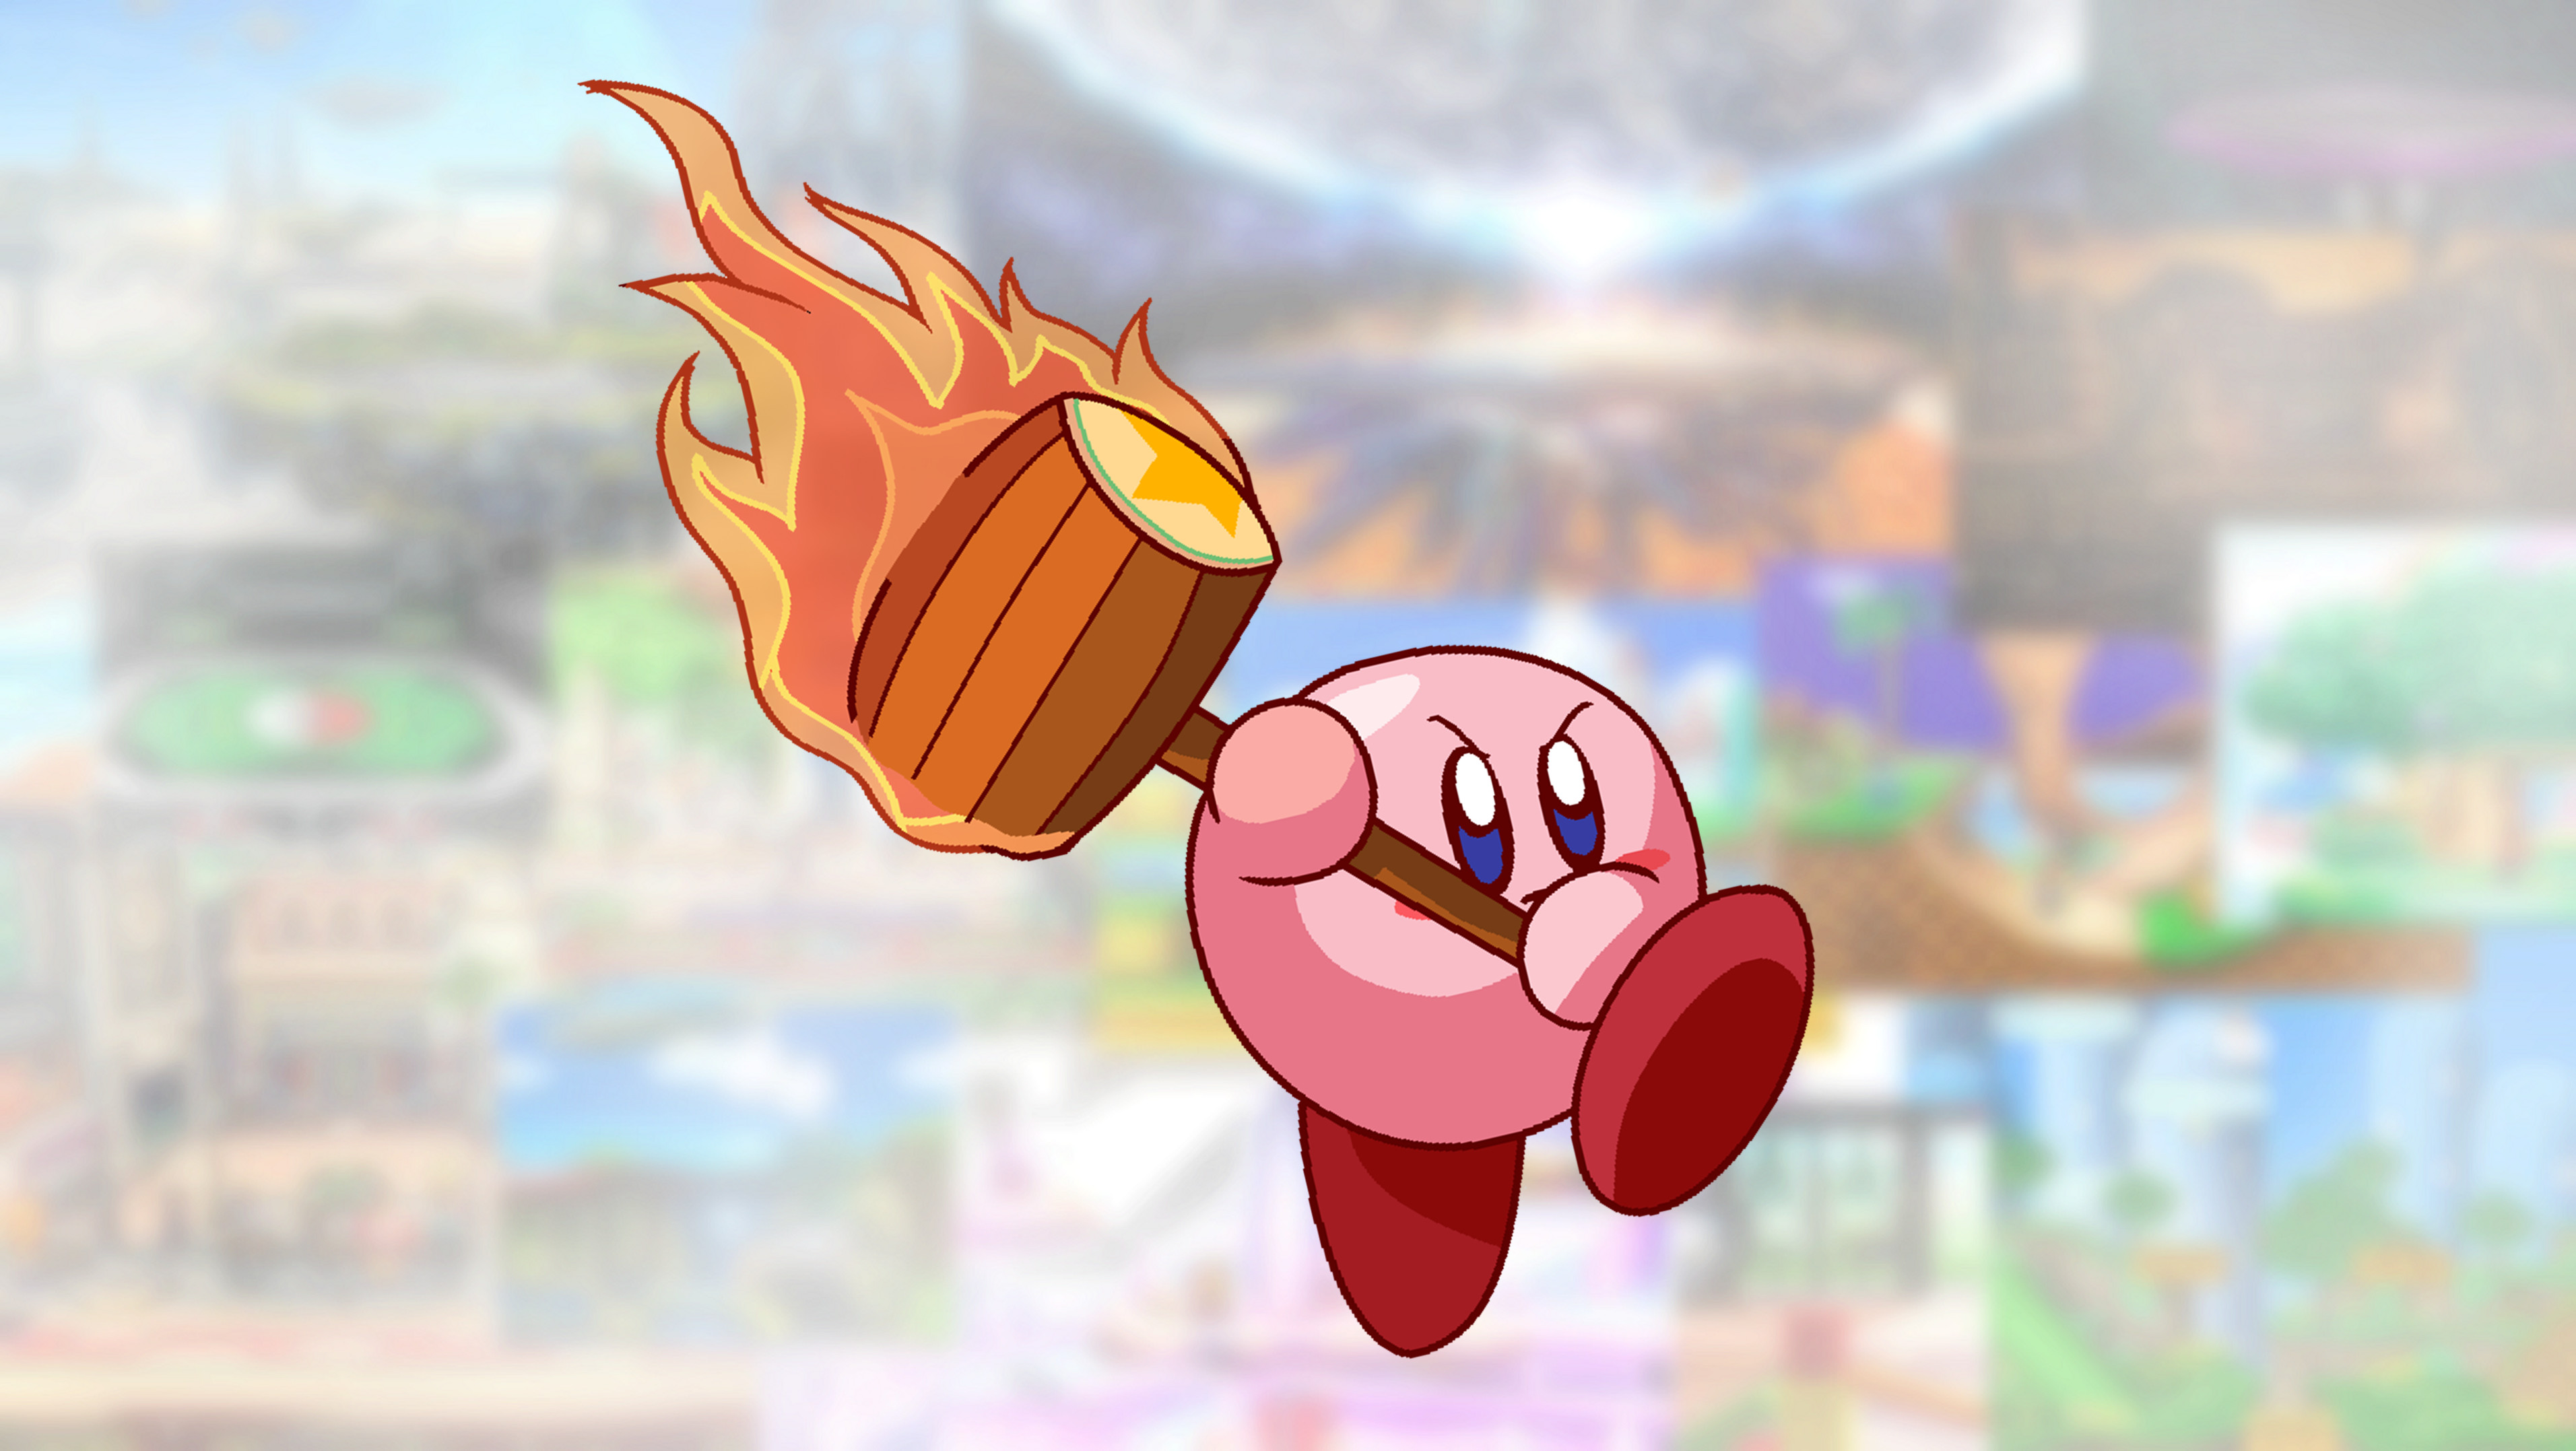 Hammer Time KIRBY Smash Bros Wallpaper by Redchesto